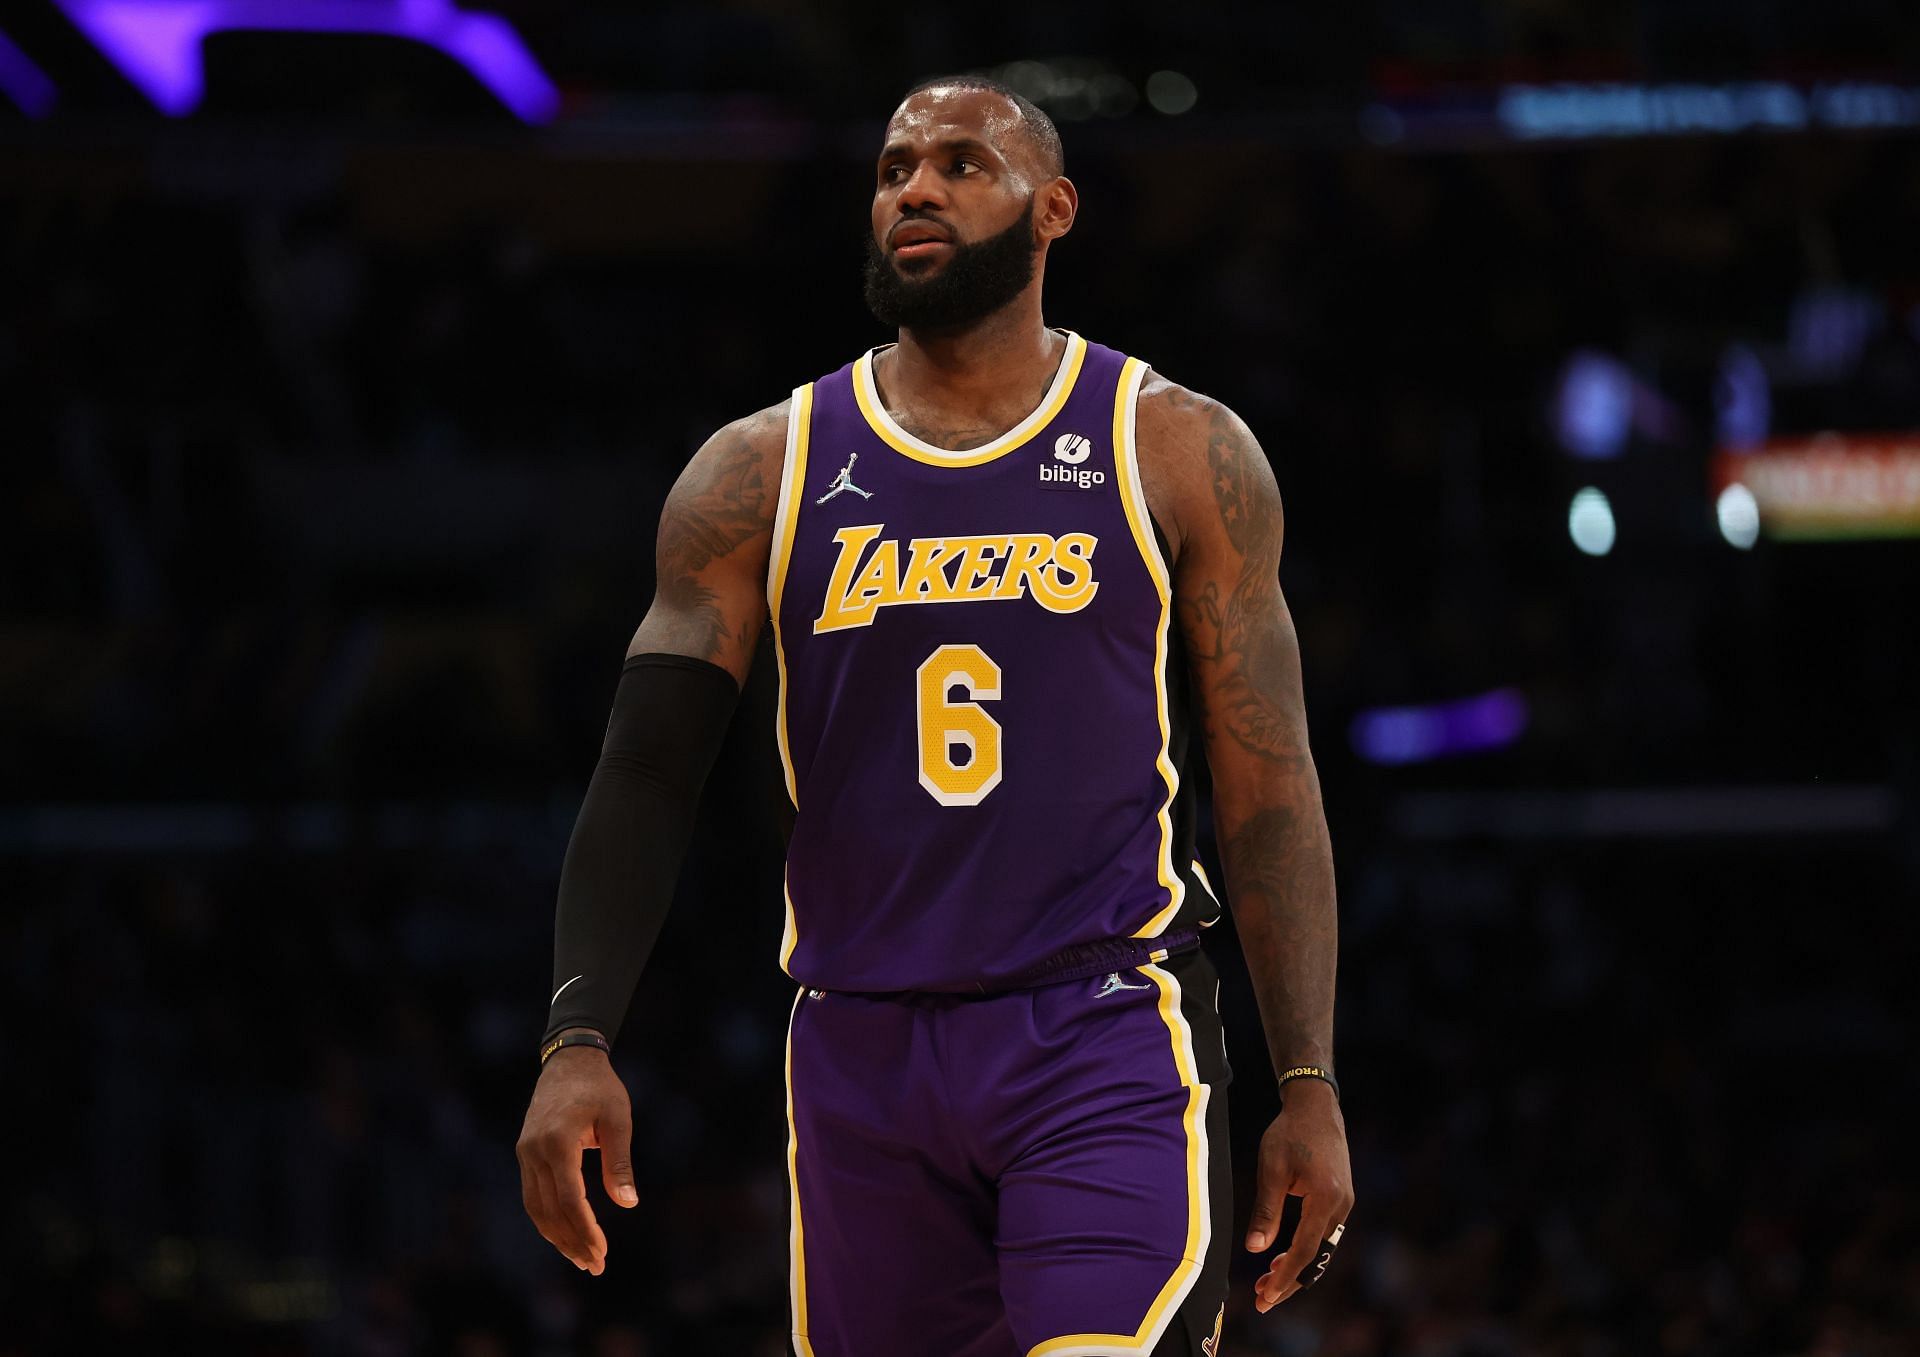 LeBron James of the LA Lakers against his former team, the Cleveland Cavaliers